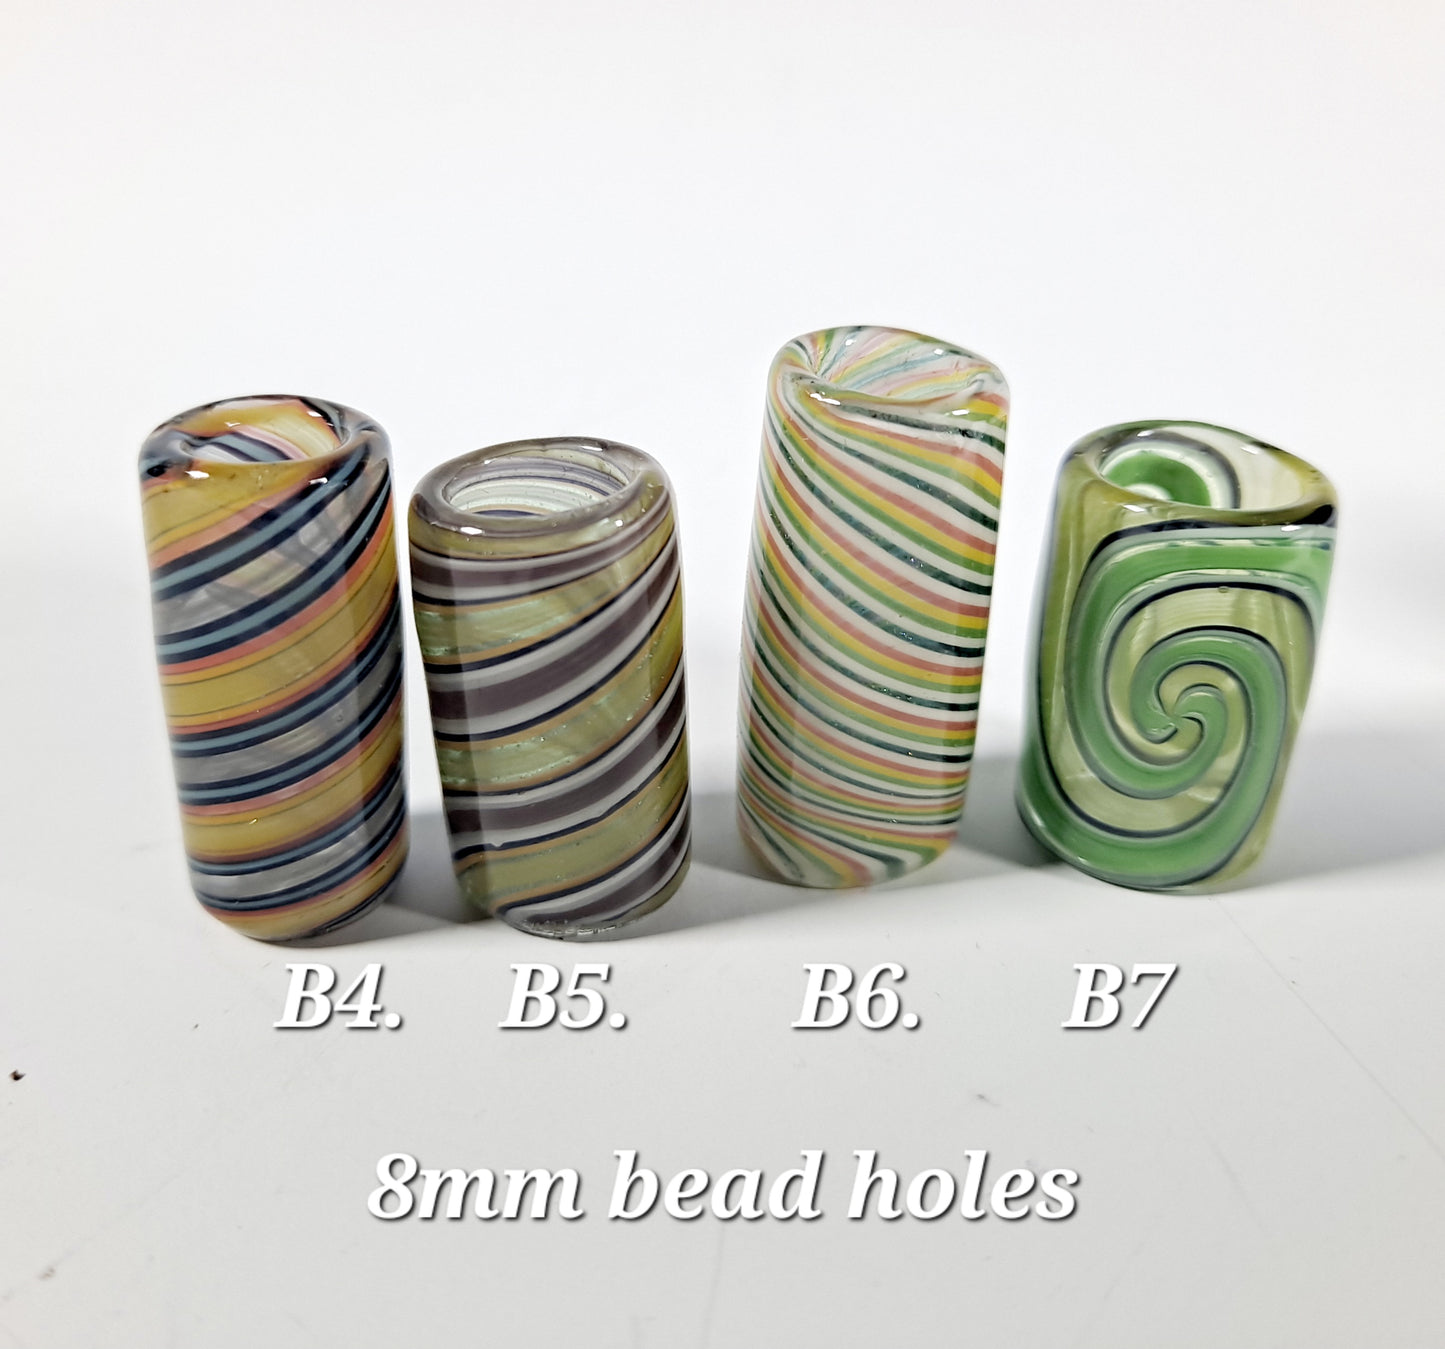 Full Color Glass Dread Beads, Bead Hole Sizes 6mm, 8mm, 10mm, Ready to Ship